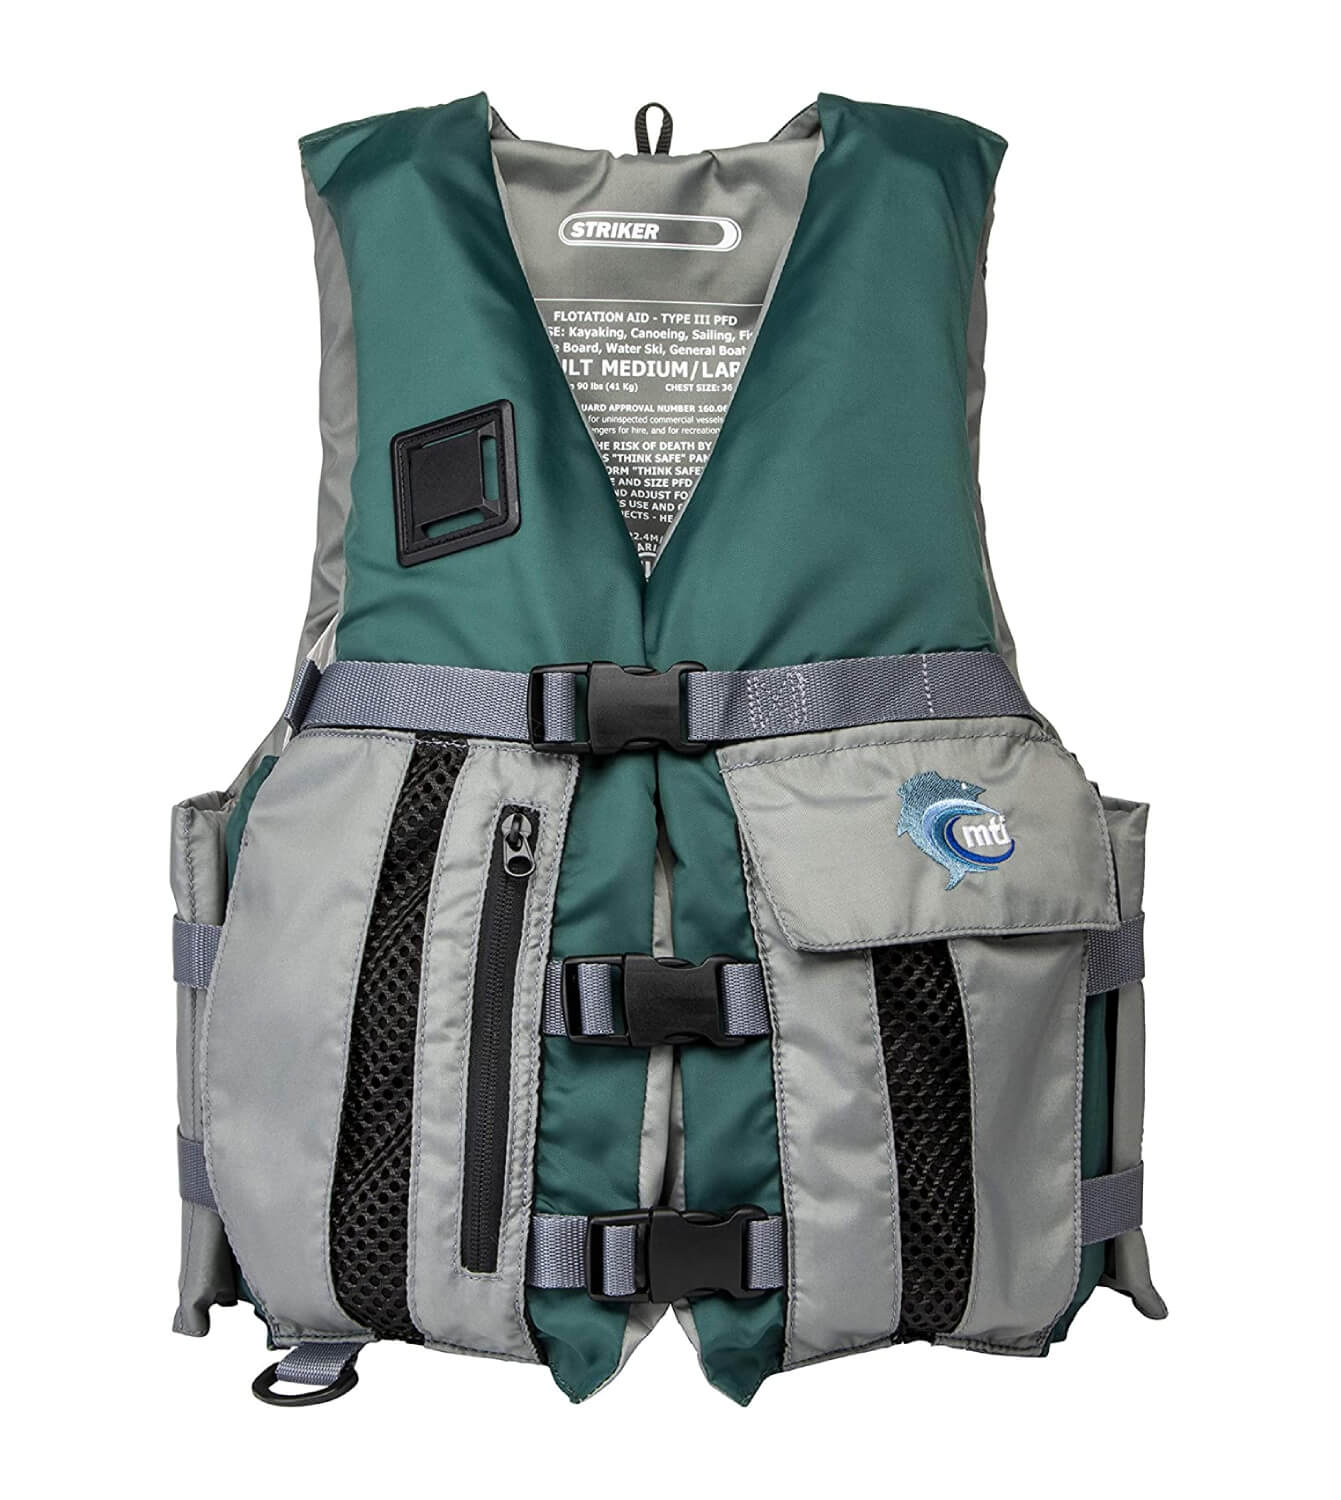 Best Fishing Life Vest: The Top 7 Fishing Life Jackets in 2022 - Gili Sports  EU